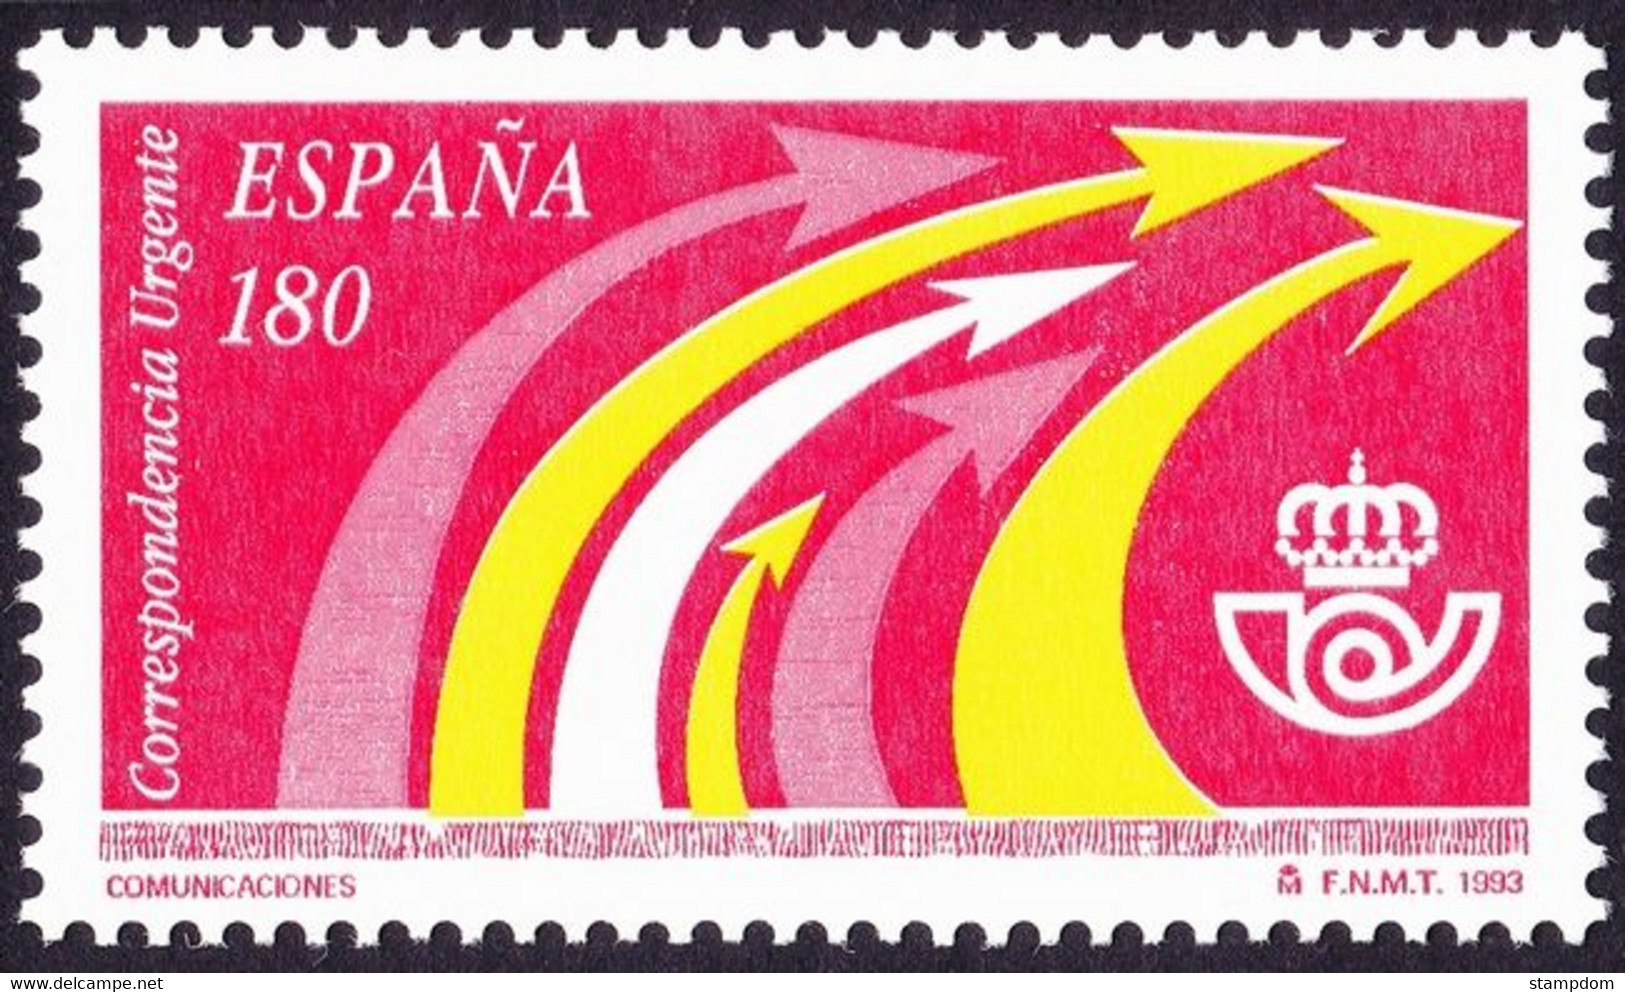 SPAIN 1993 Special Delivery Sc#E28 MNH @S4502 - Expres